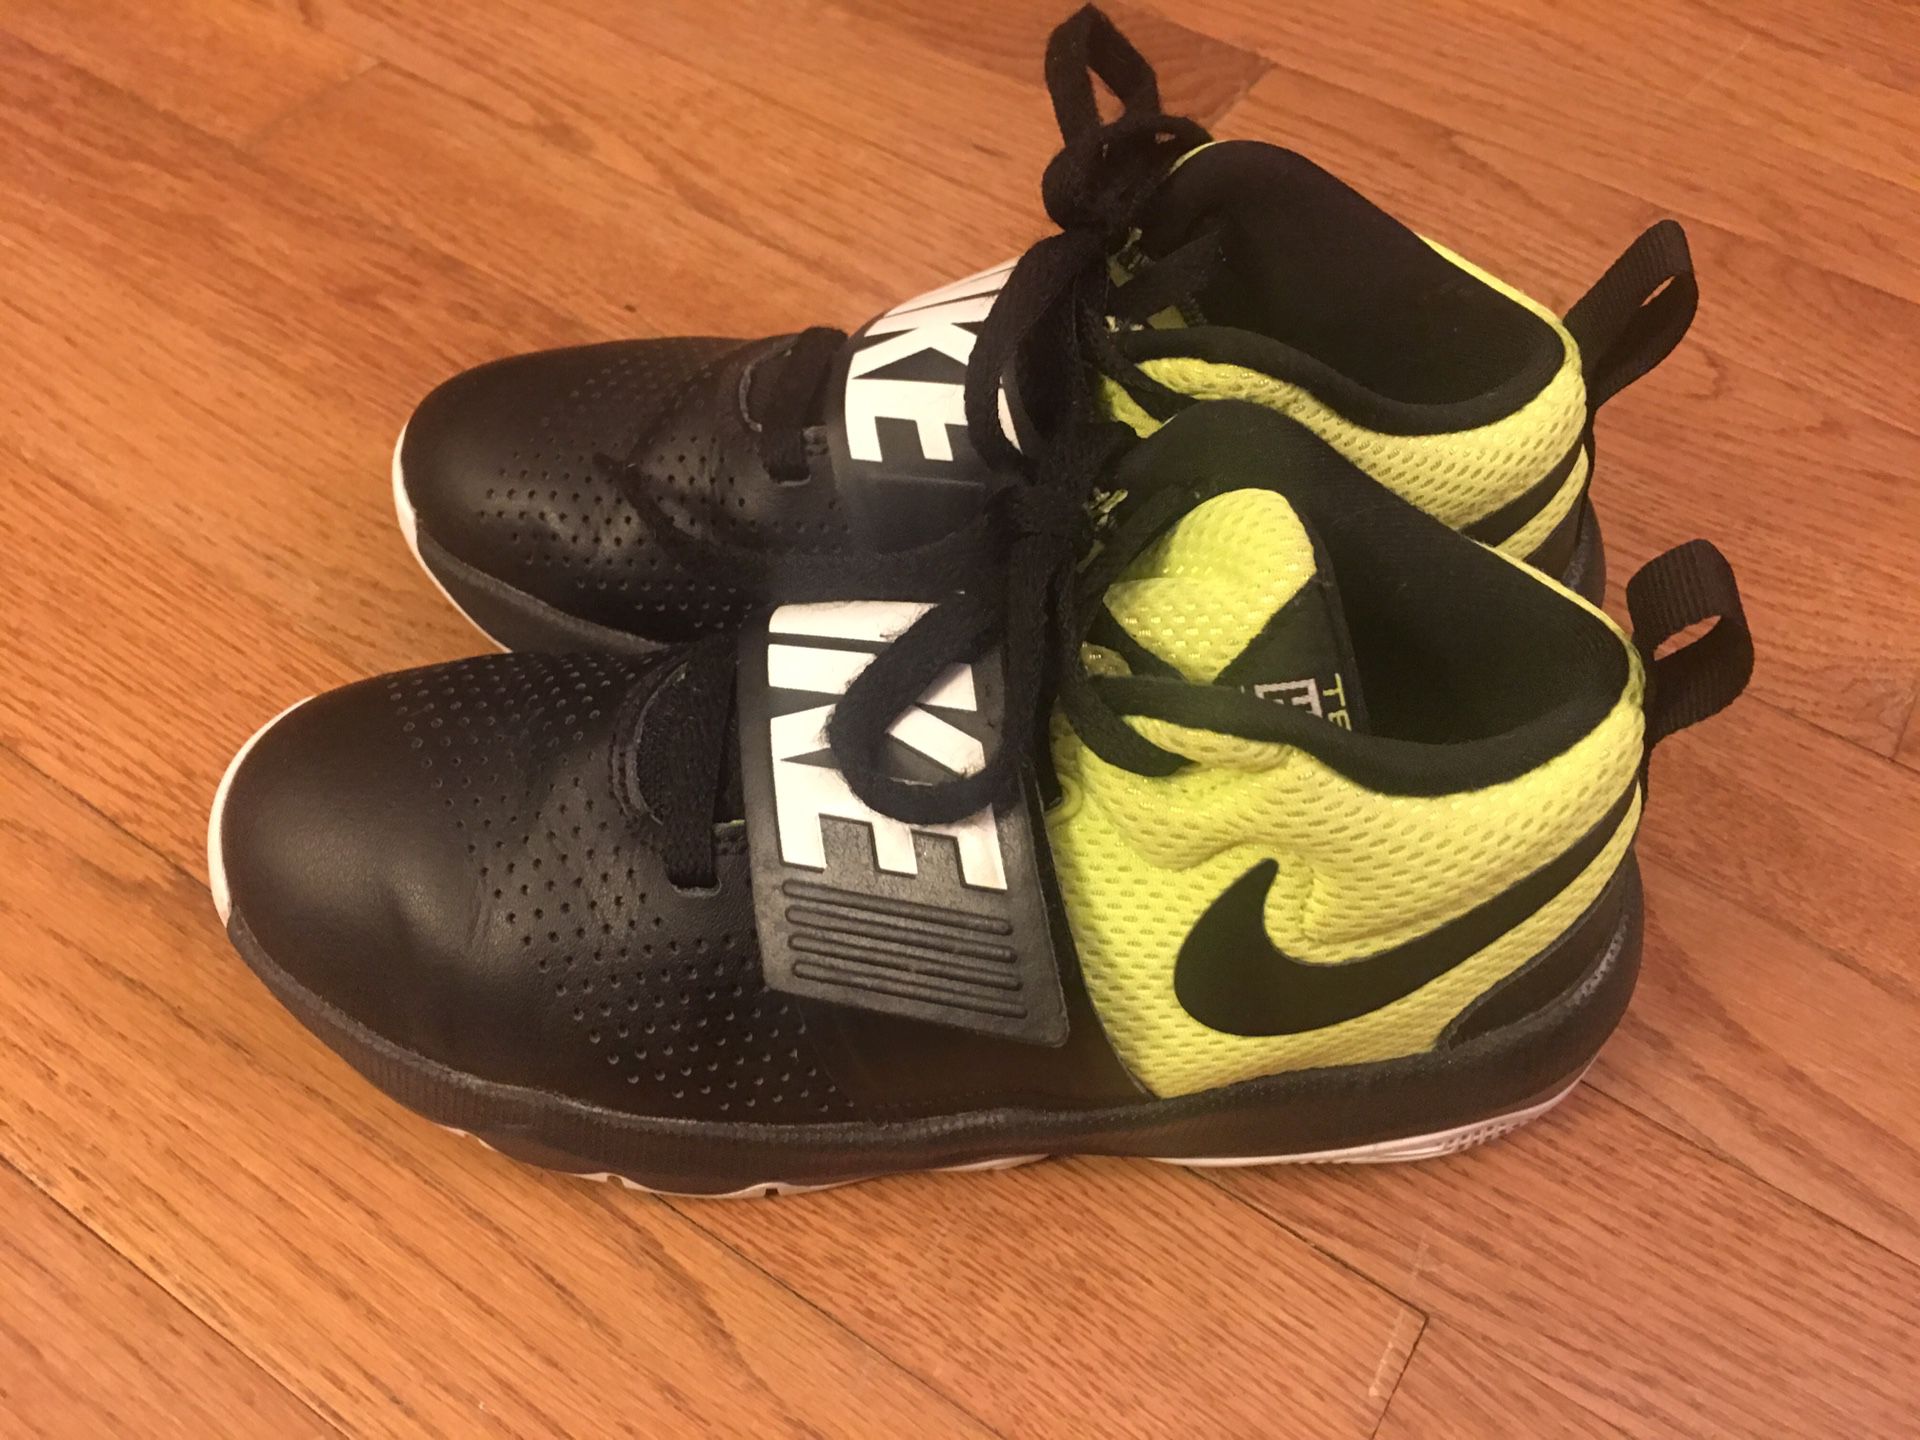 Boy’s NIKE basketball sneakers size 4. Great condition!